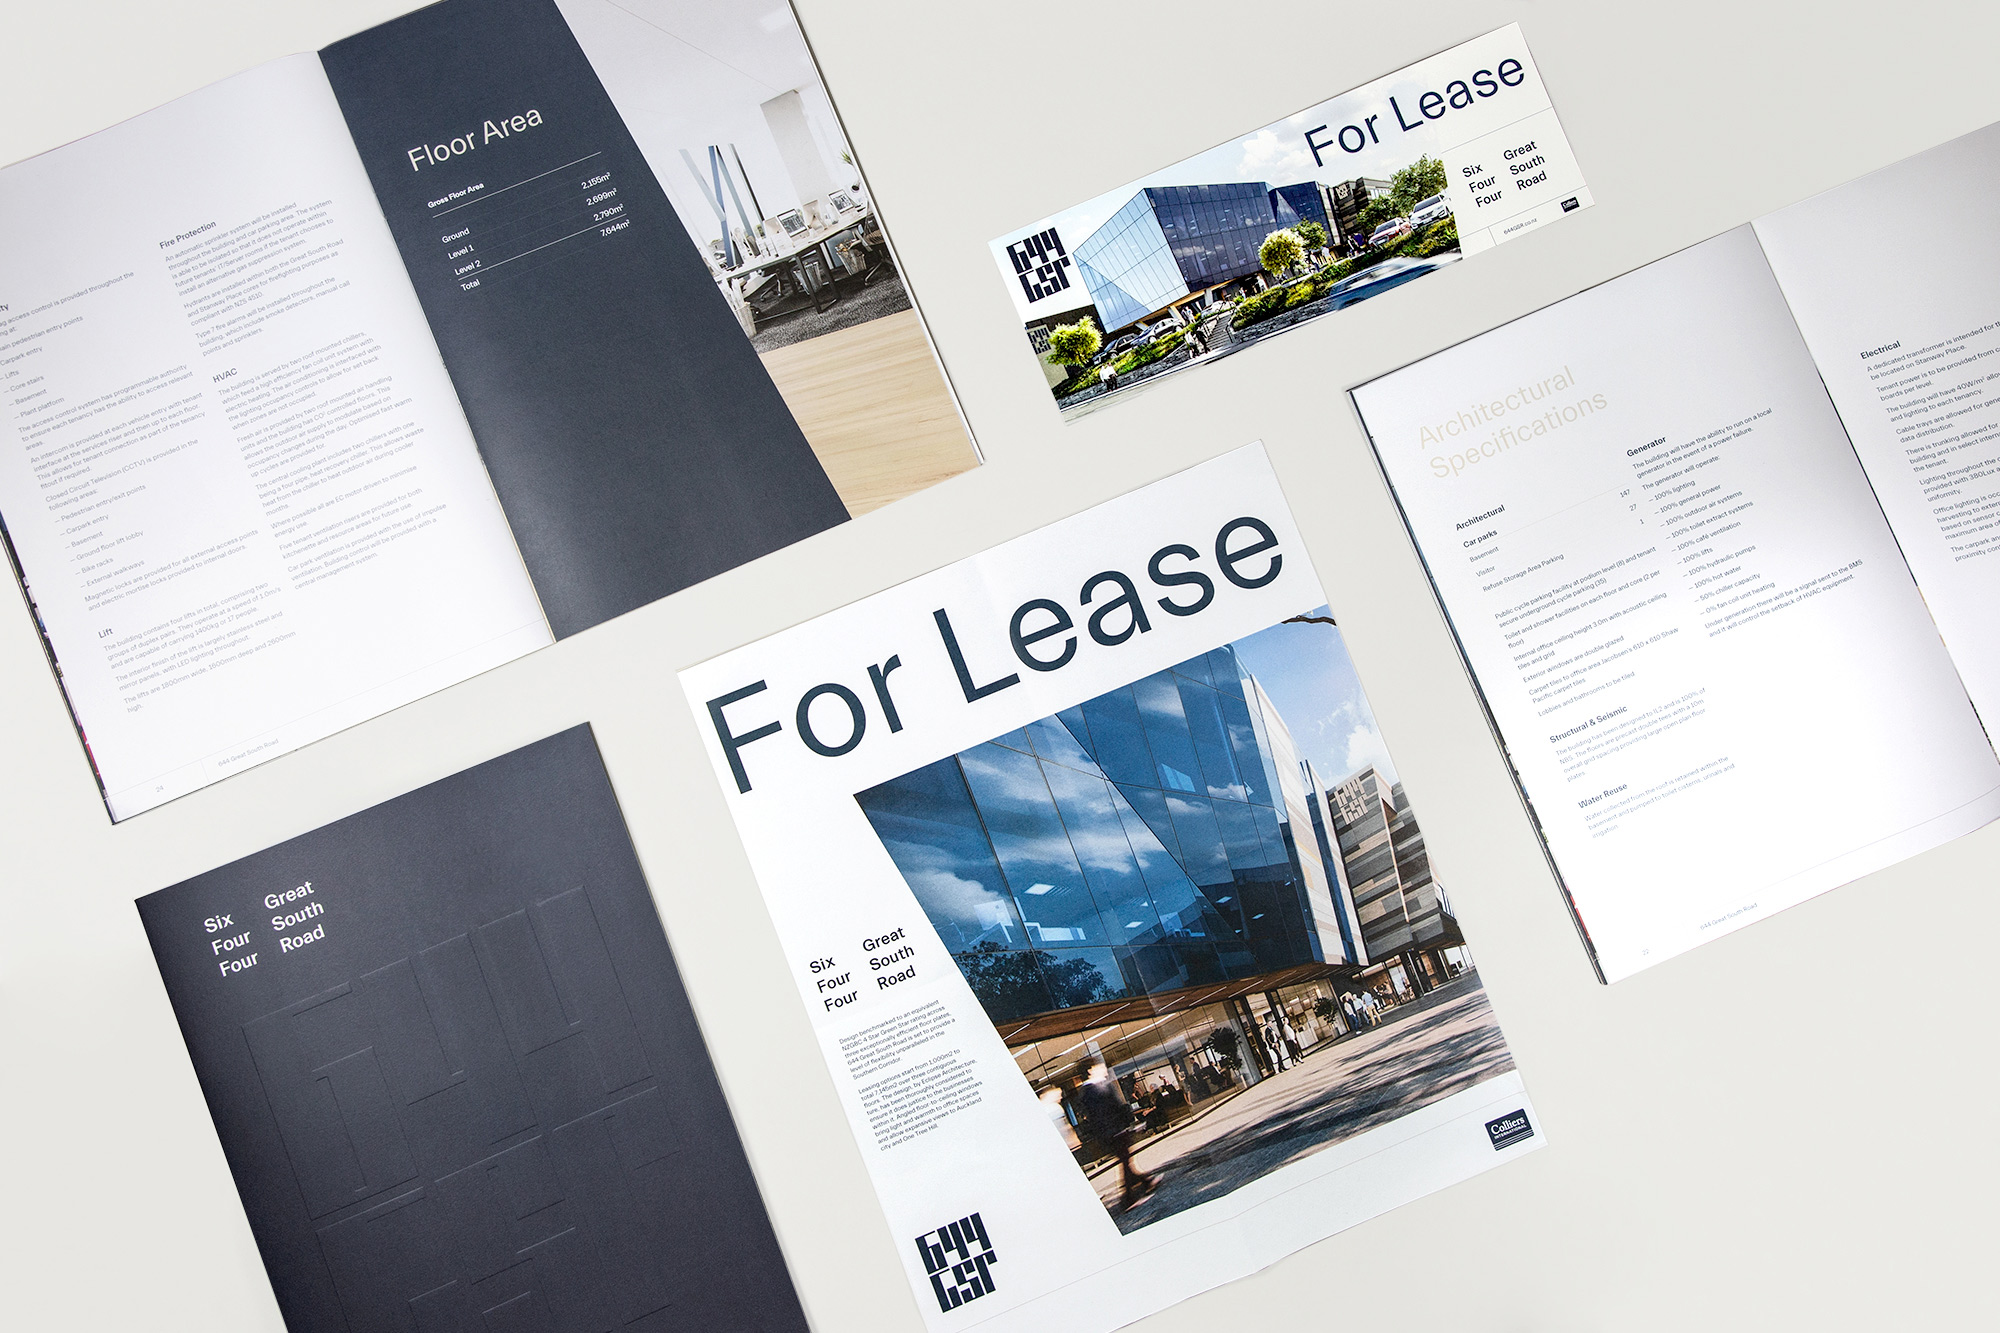 Various pages of the branded publication alongside for lease flyers